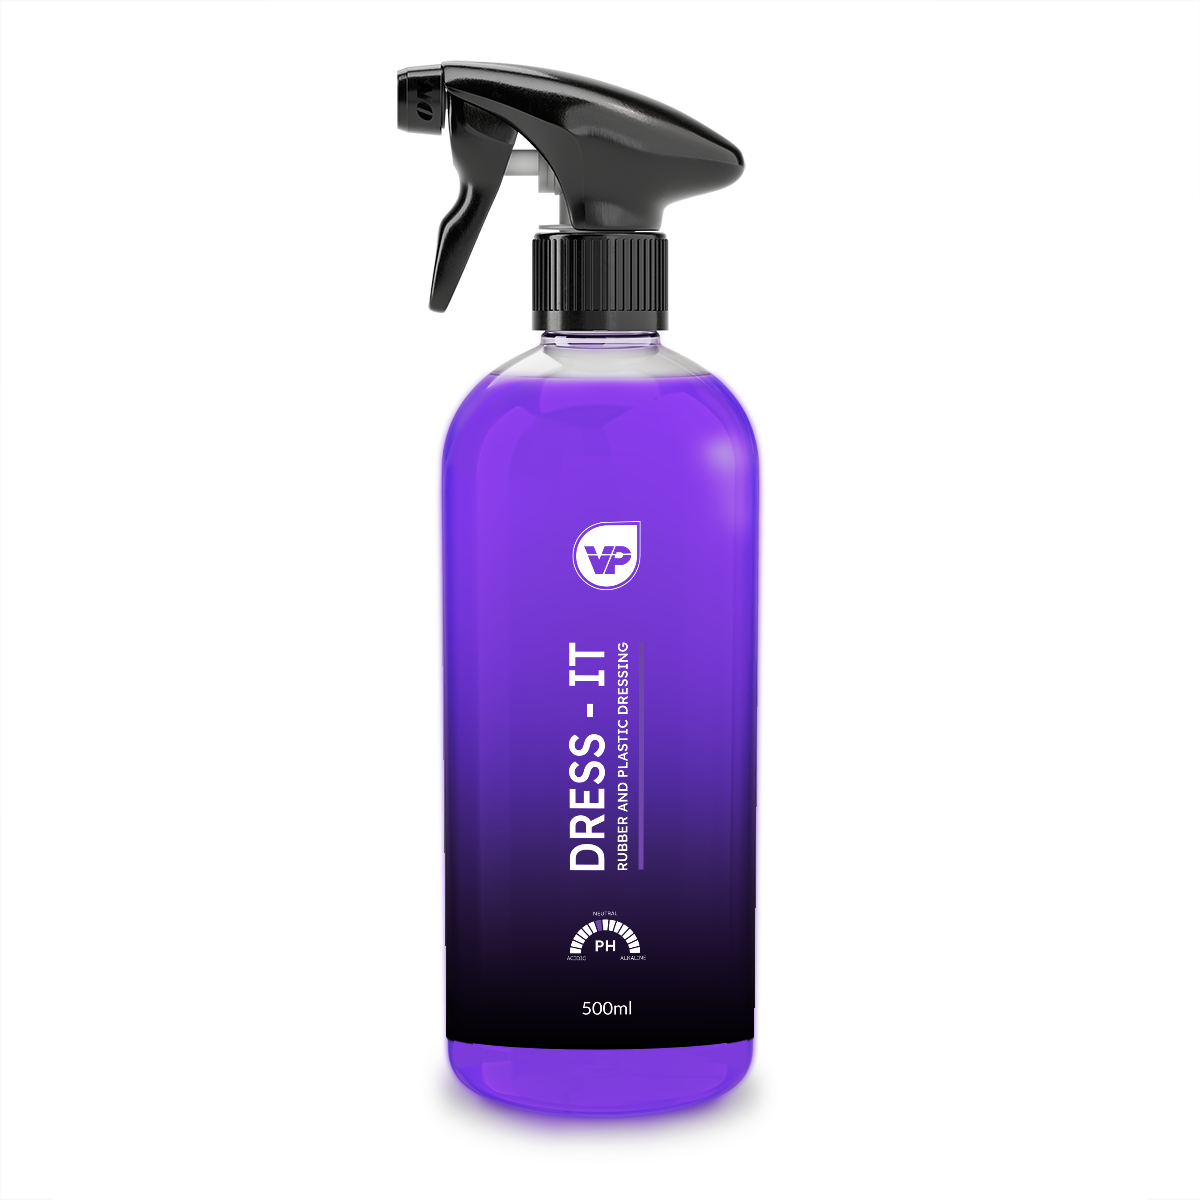 Dress-It-car-rubber-and-plastic-dressing-500ml-VP.png